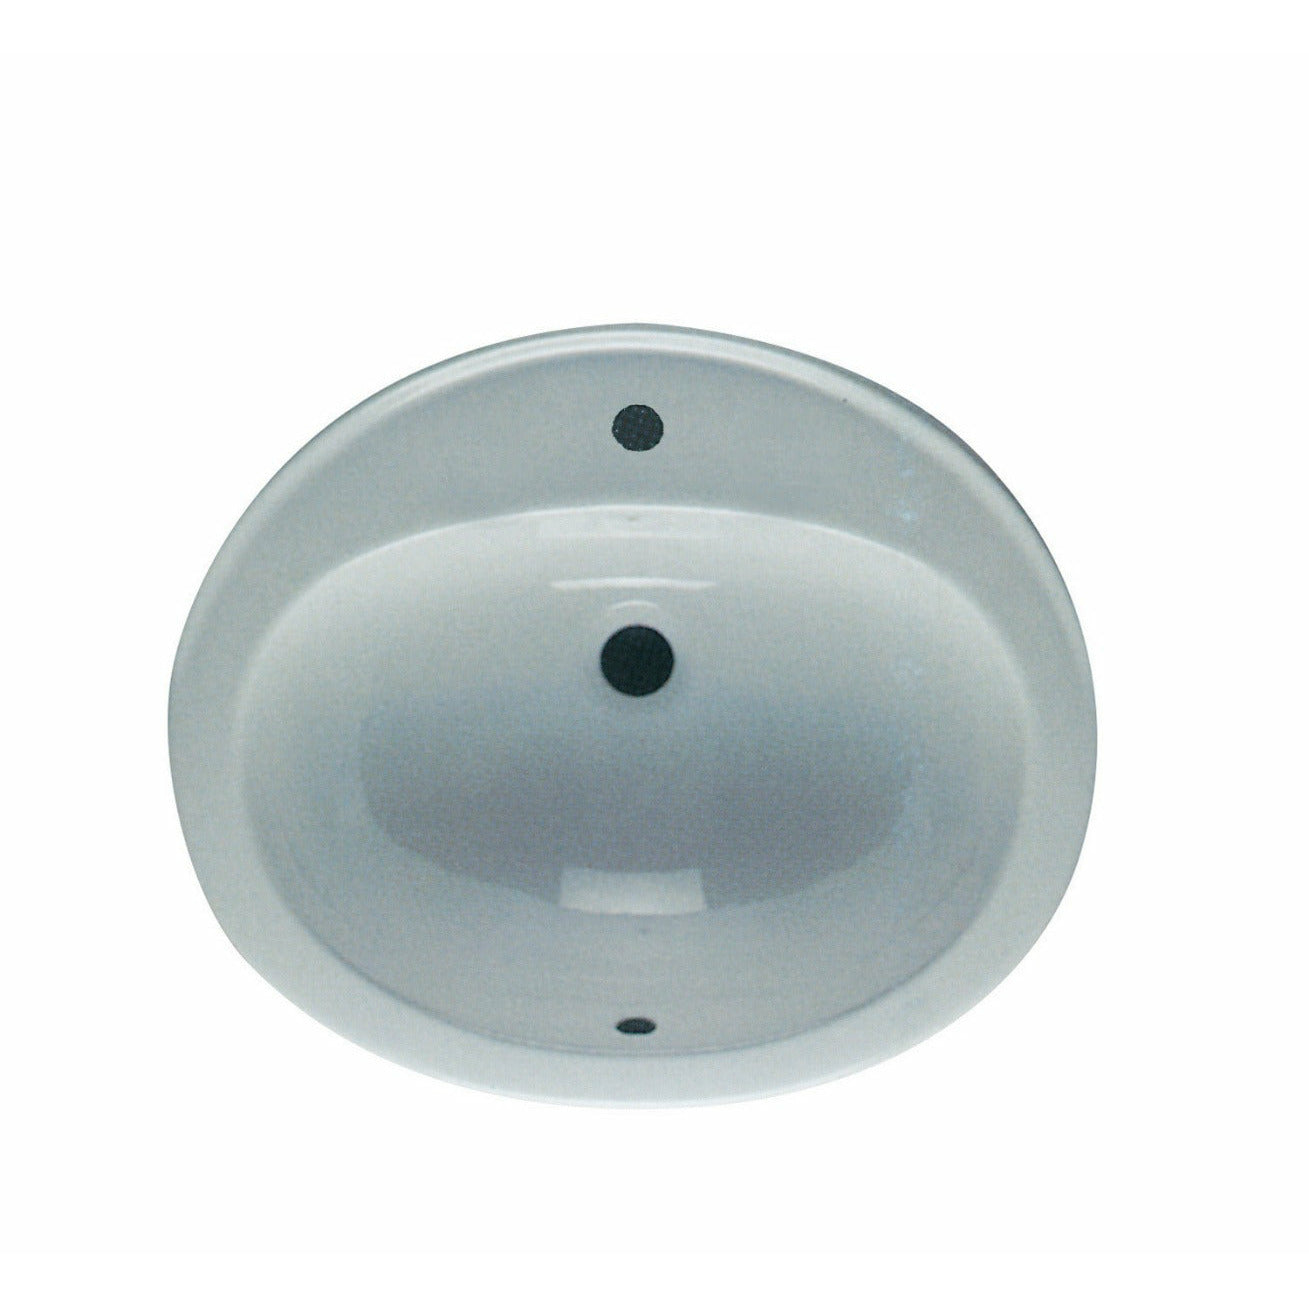 Frontline White Jessica 530mm Over-the-Counter Basin - 1 Tap Hole - Letta London - 